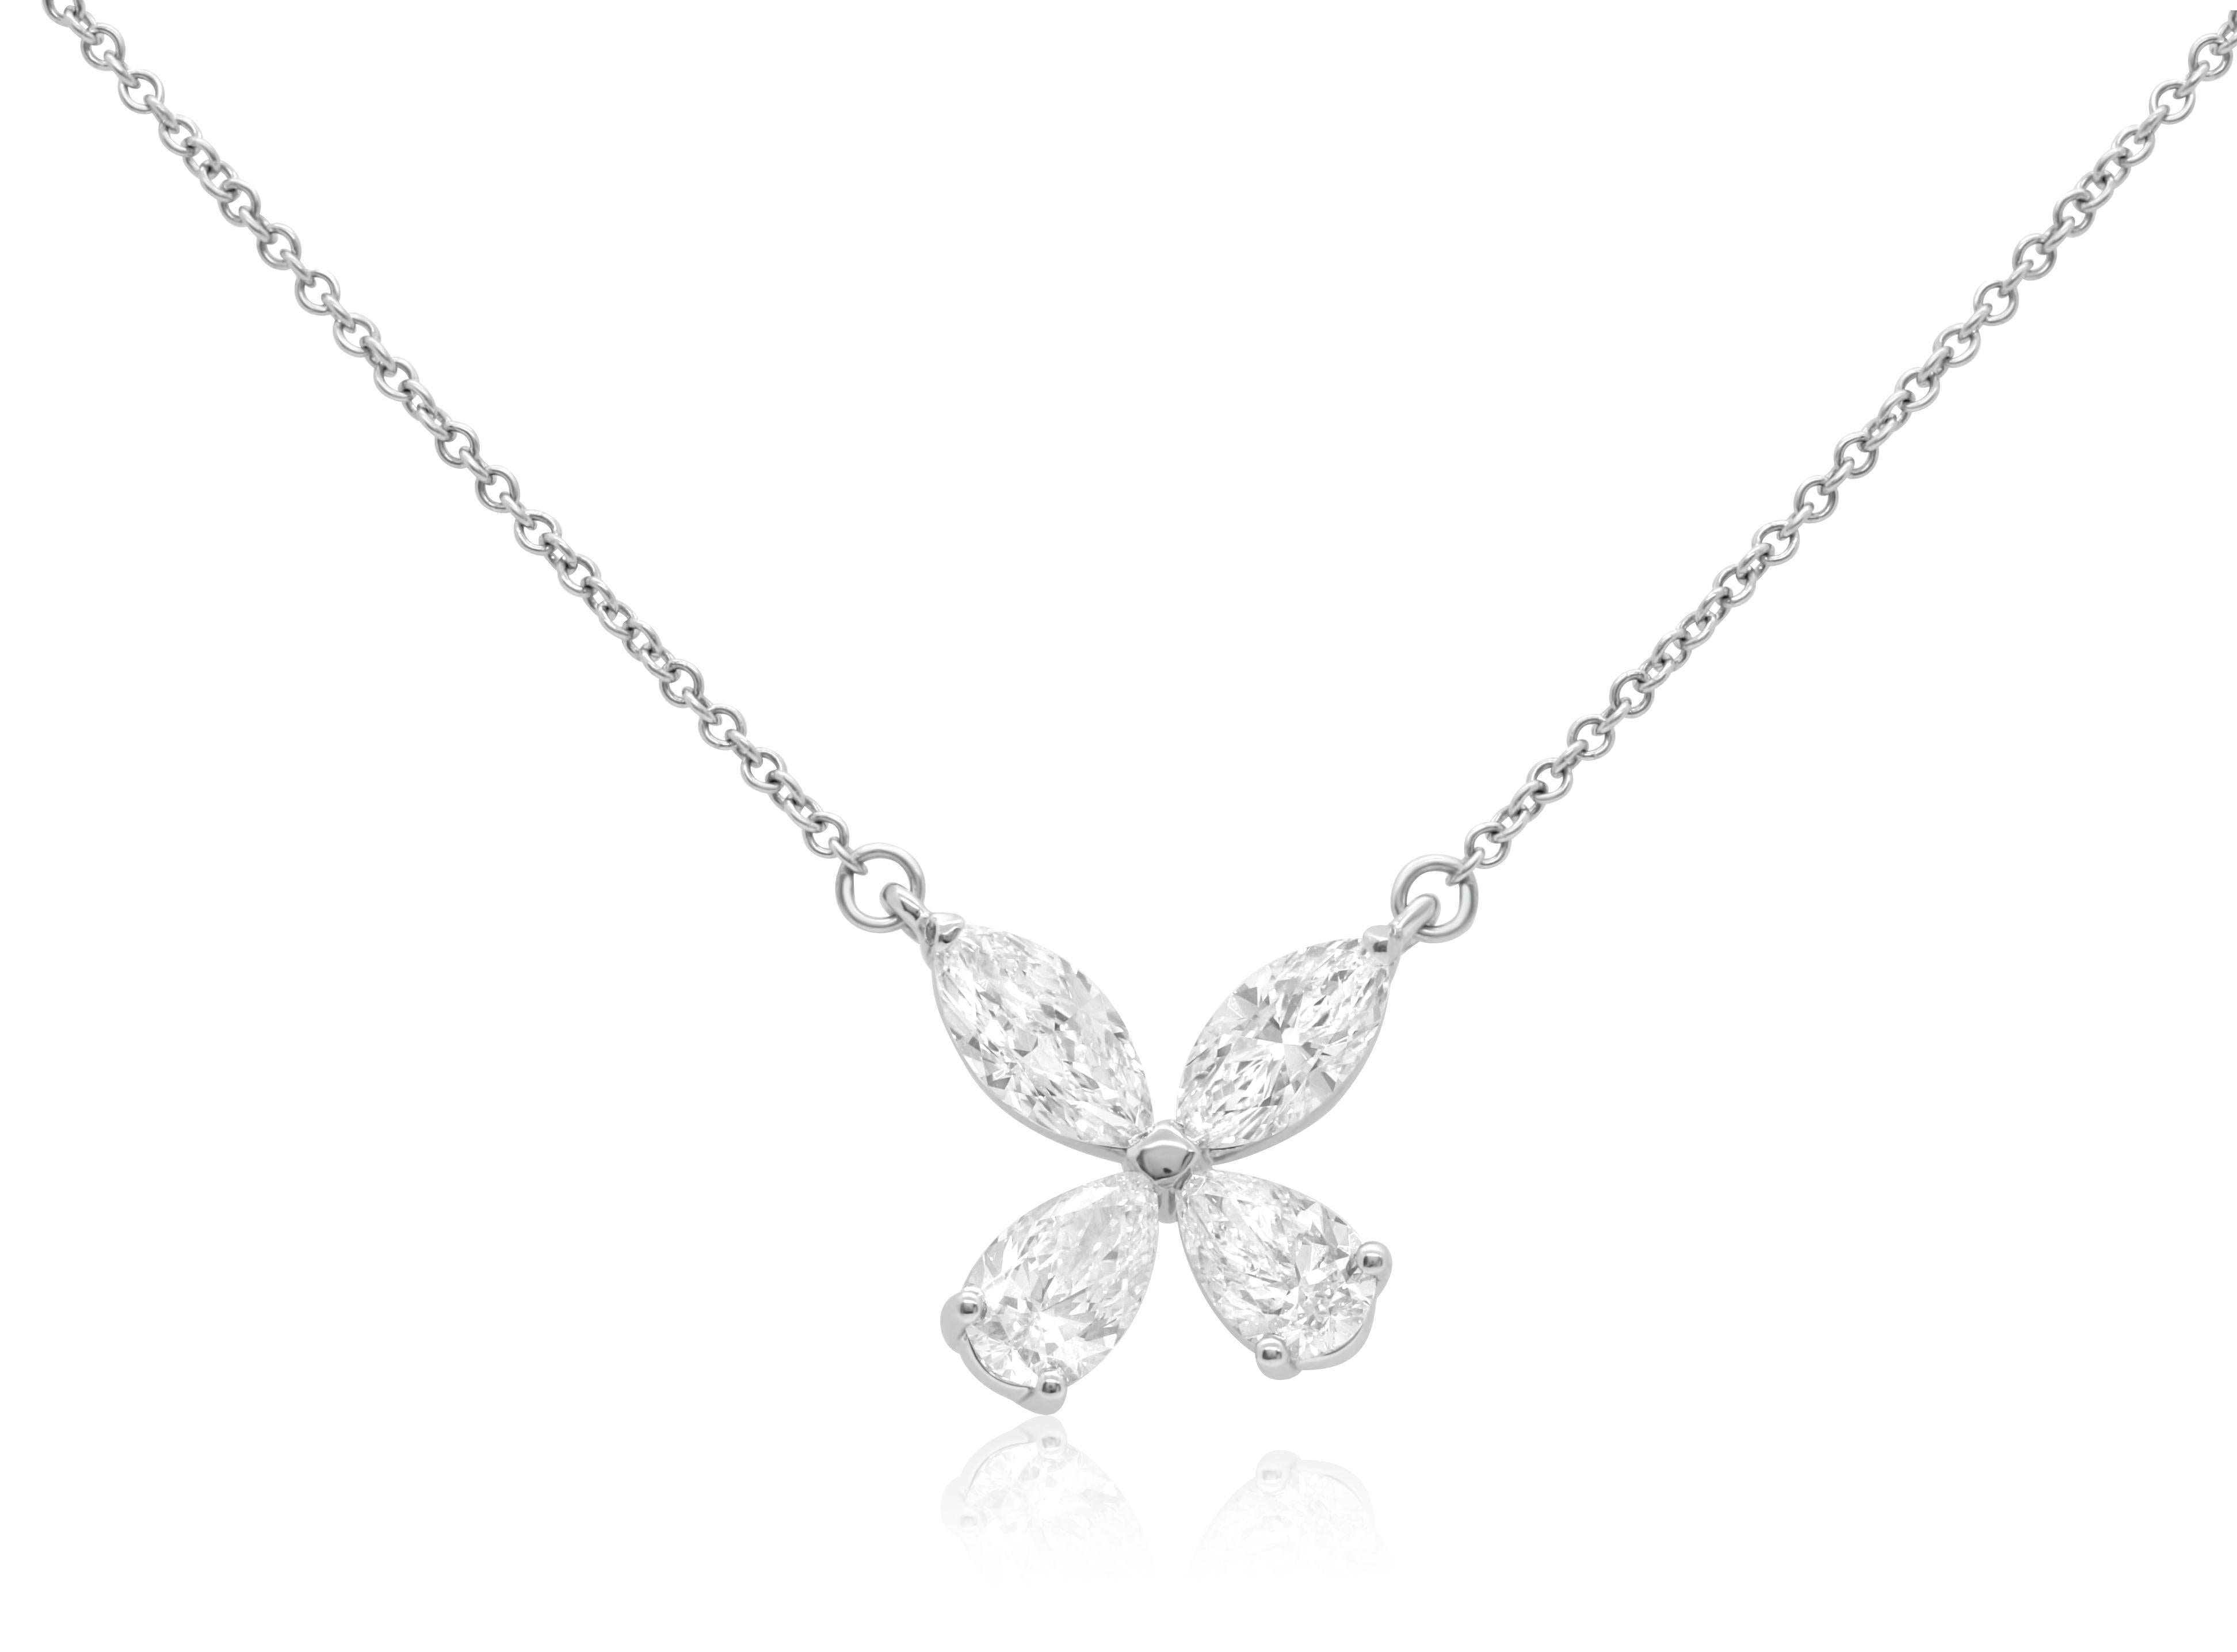 platinum diamond pendent with marquise and pear shapes all GIA 
Certified 2.03cts G SI1 GIA and 2.03 marquise G-SI1 GIA certified  
Diana M is one-stop shop for all your jewelry shopping, carrying line of diamond rings, earrings, bracelets,